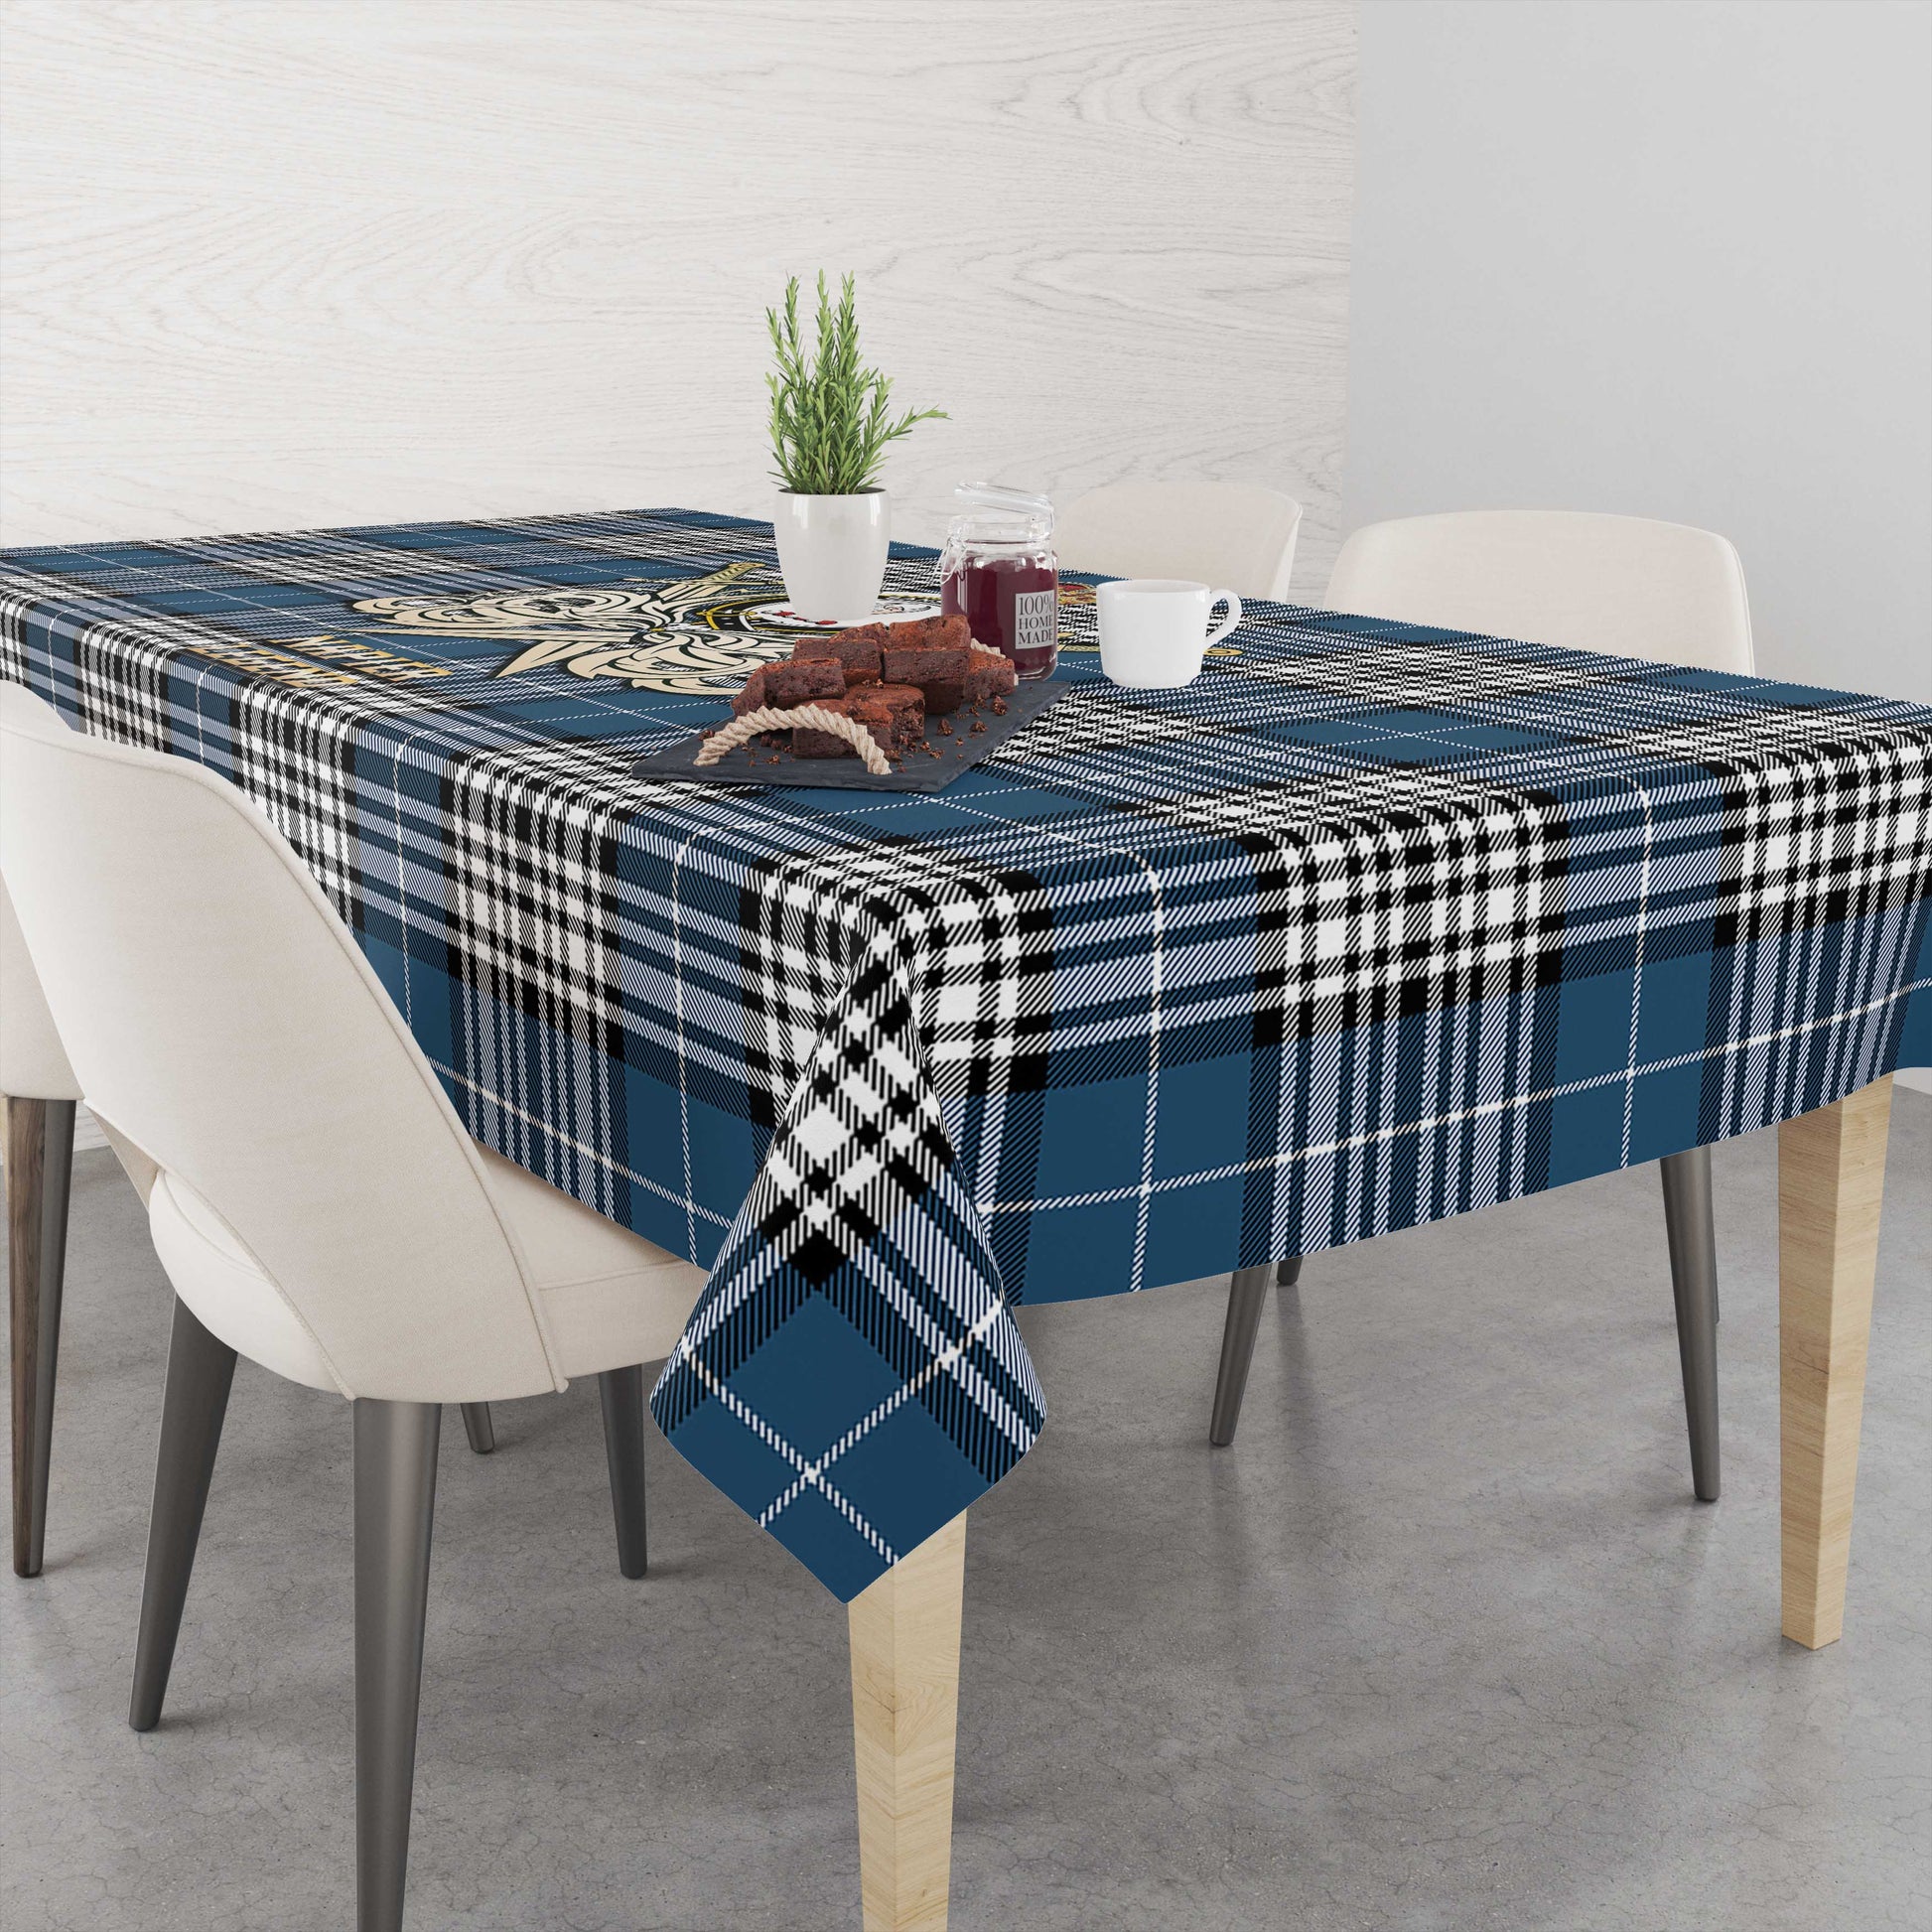 Tartan Vibes Clothing Napier Modern Tartan Tablecloth with Clan Crest and the Golden Sword of Courageous Legacy